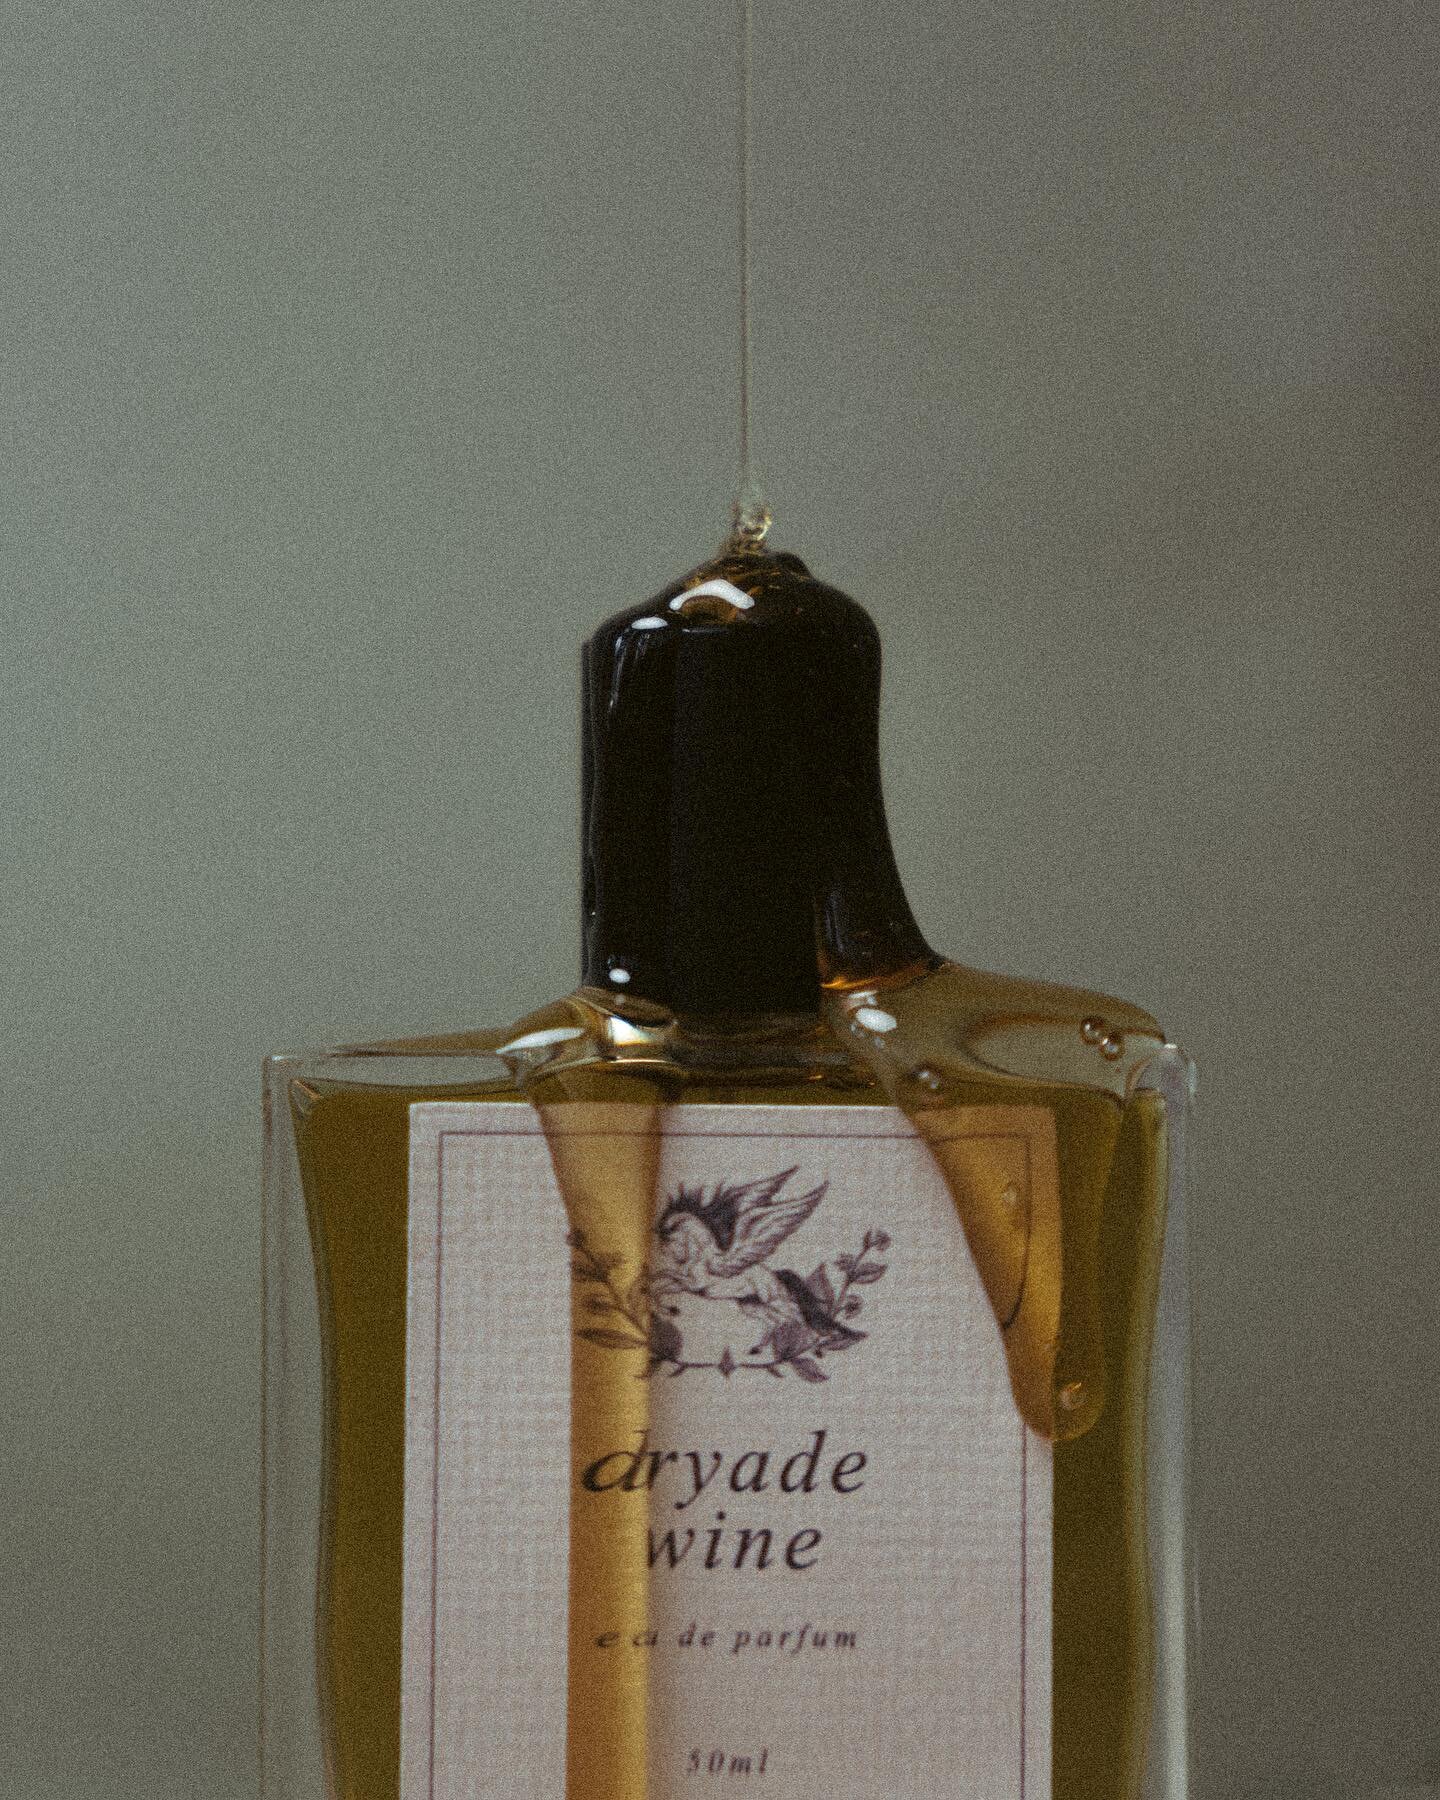 If you&rsquo;re looking for an intoxicating, honeylike fragrance for spring, Dryade Wine is it.

Explore more at the link in bio.